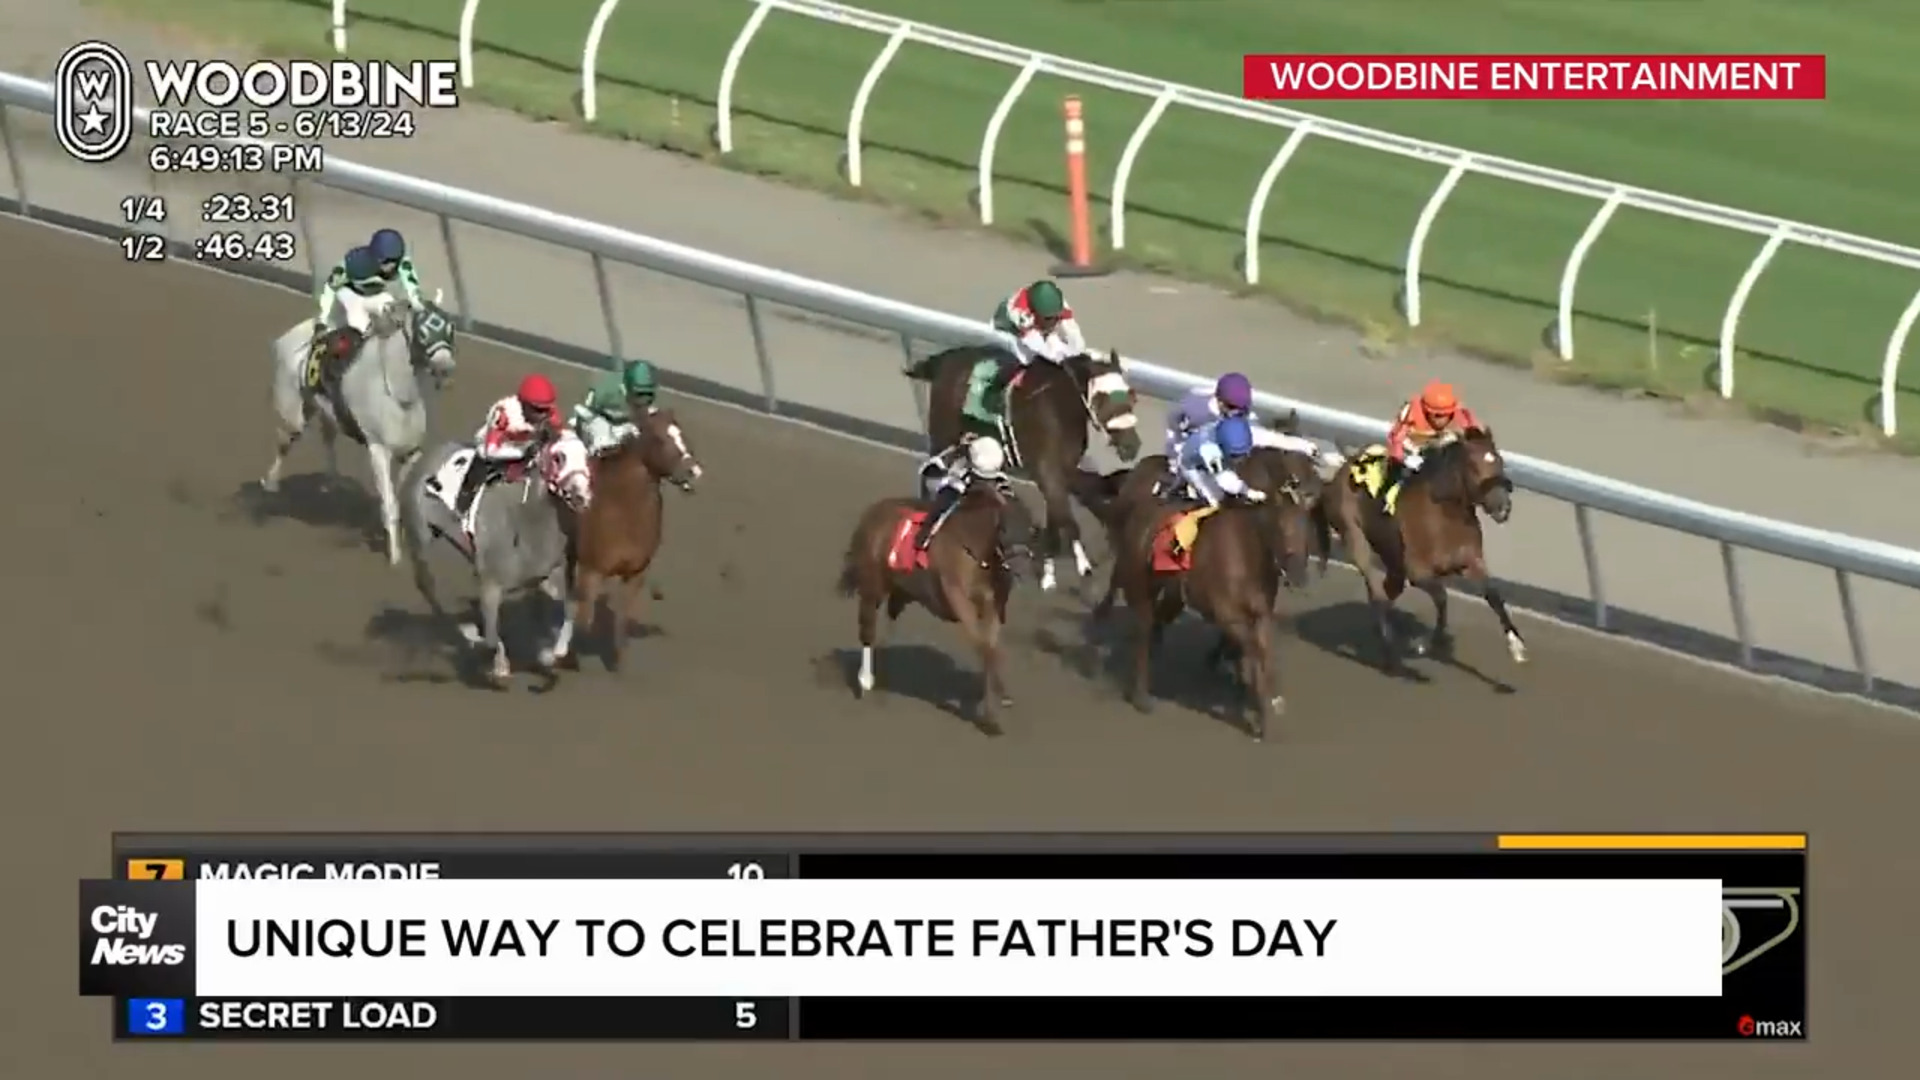 Dynamic duo celebrate Father's Day with horse race at Woodbine Racetrack